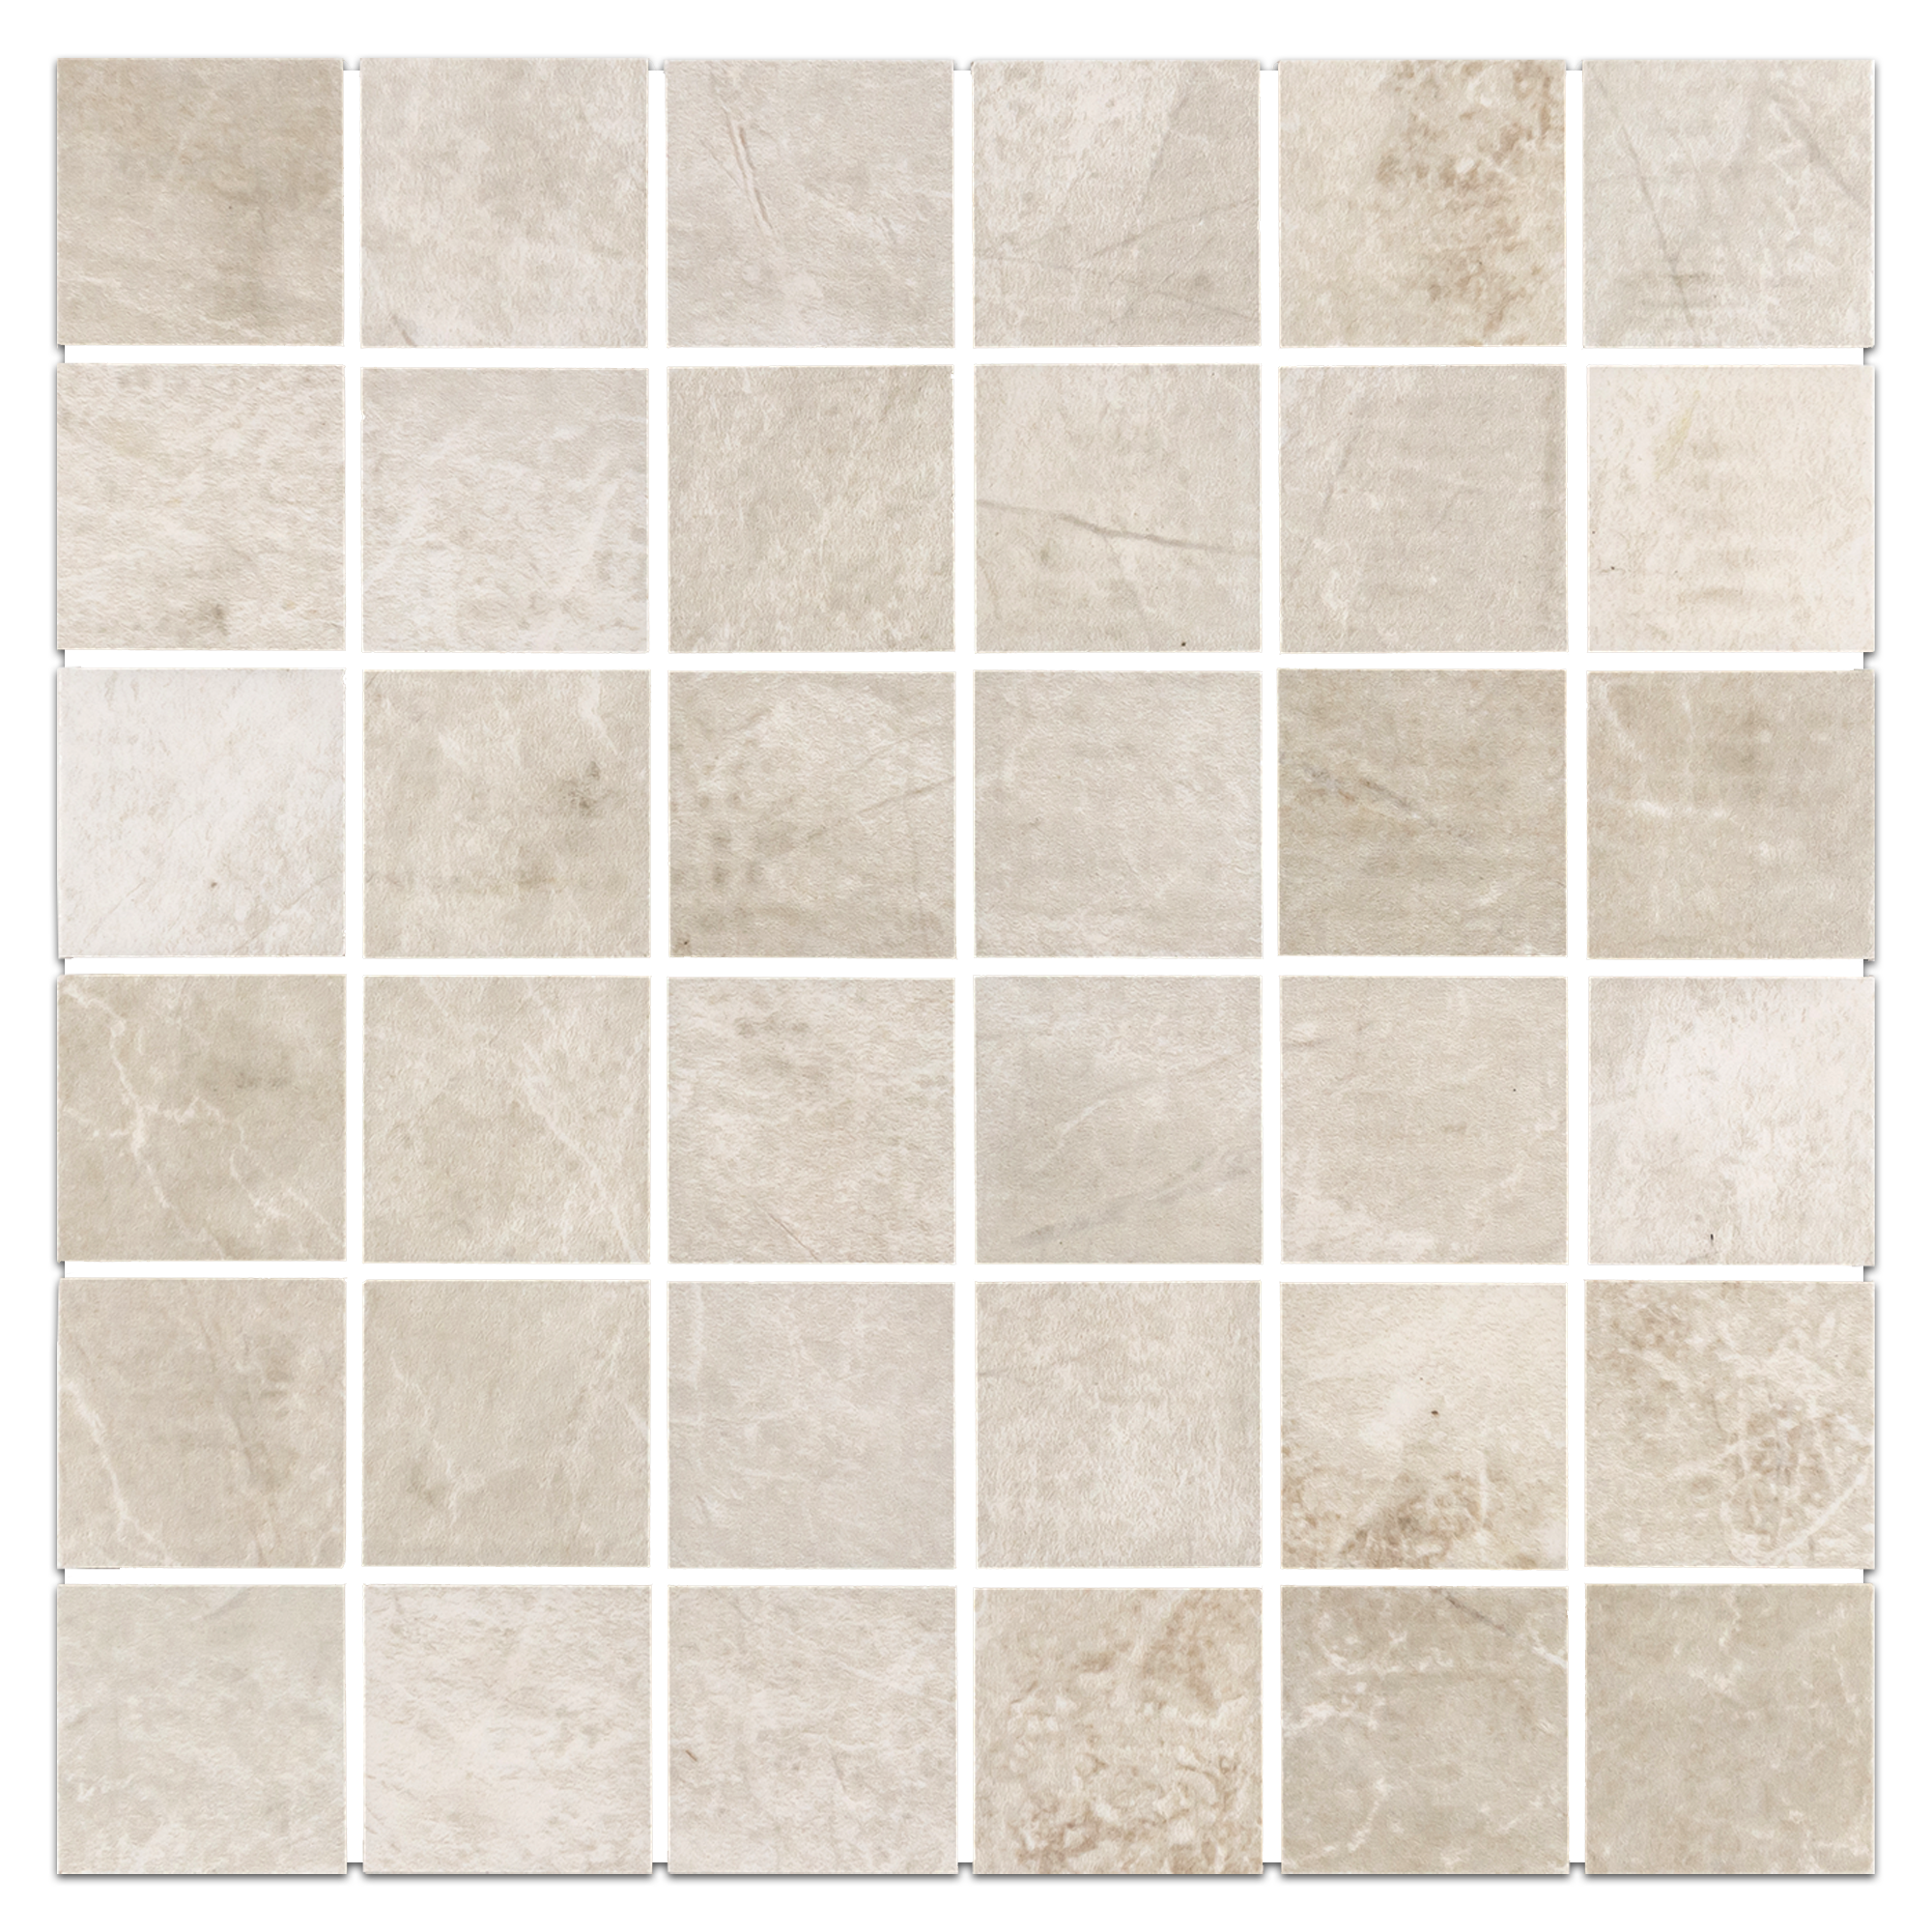 Elon Nuance White Shell Porcelain 2x2 Straight Stack Field Mosaic 12x12x0.375 Semi Polished MP302P Surface Group International Product